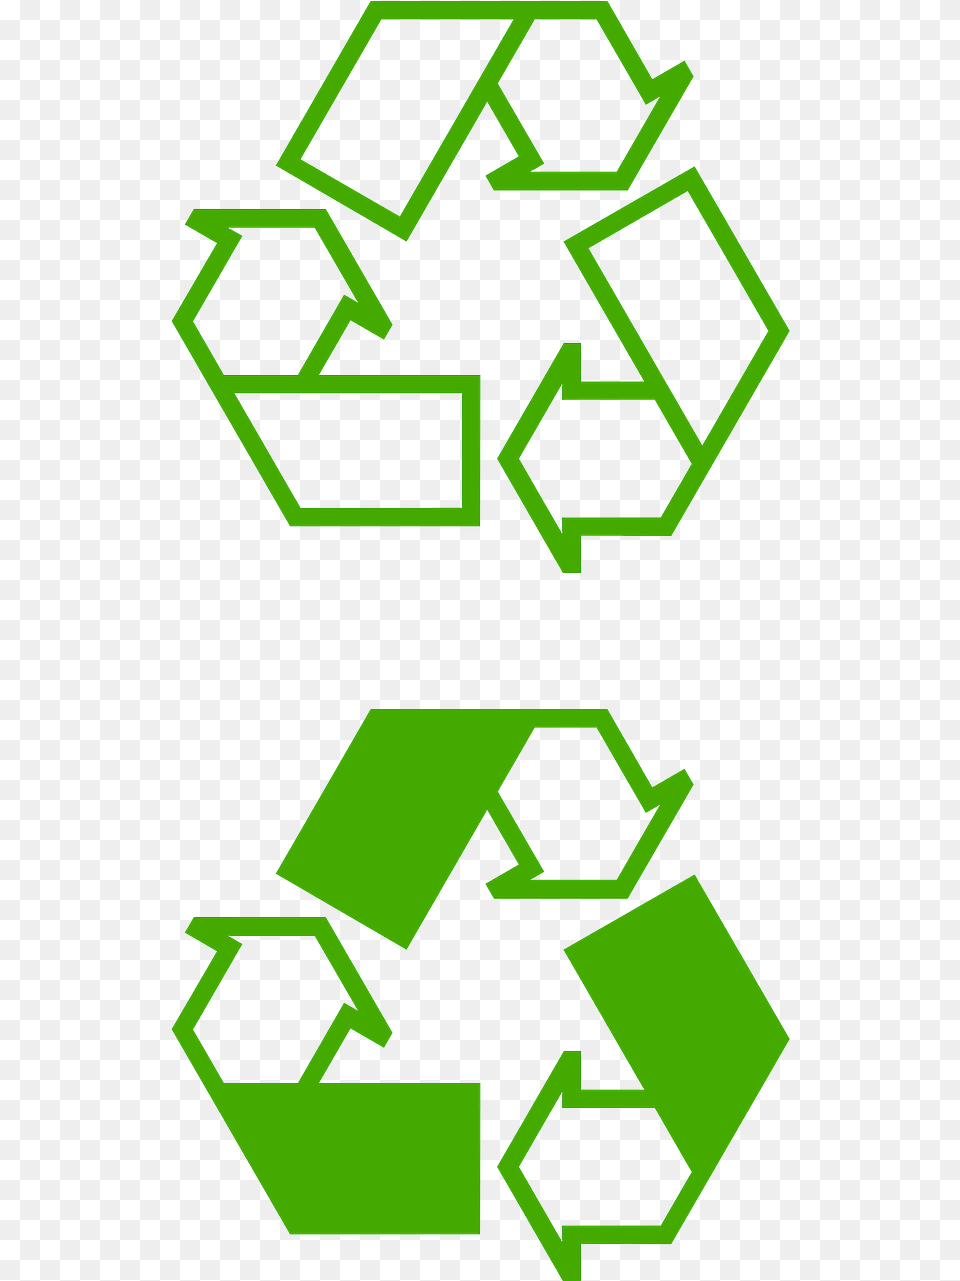 Recycle Symbol On Cardboard, Recycling Symbol Png Image